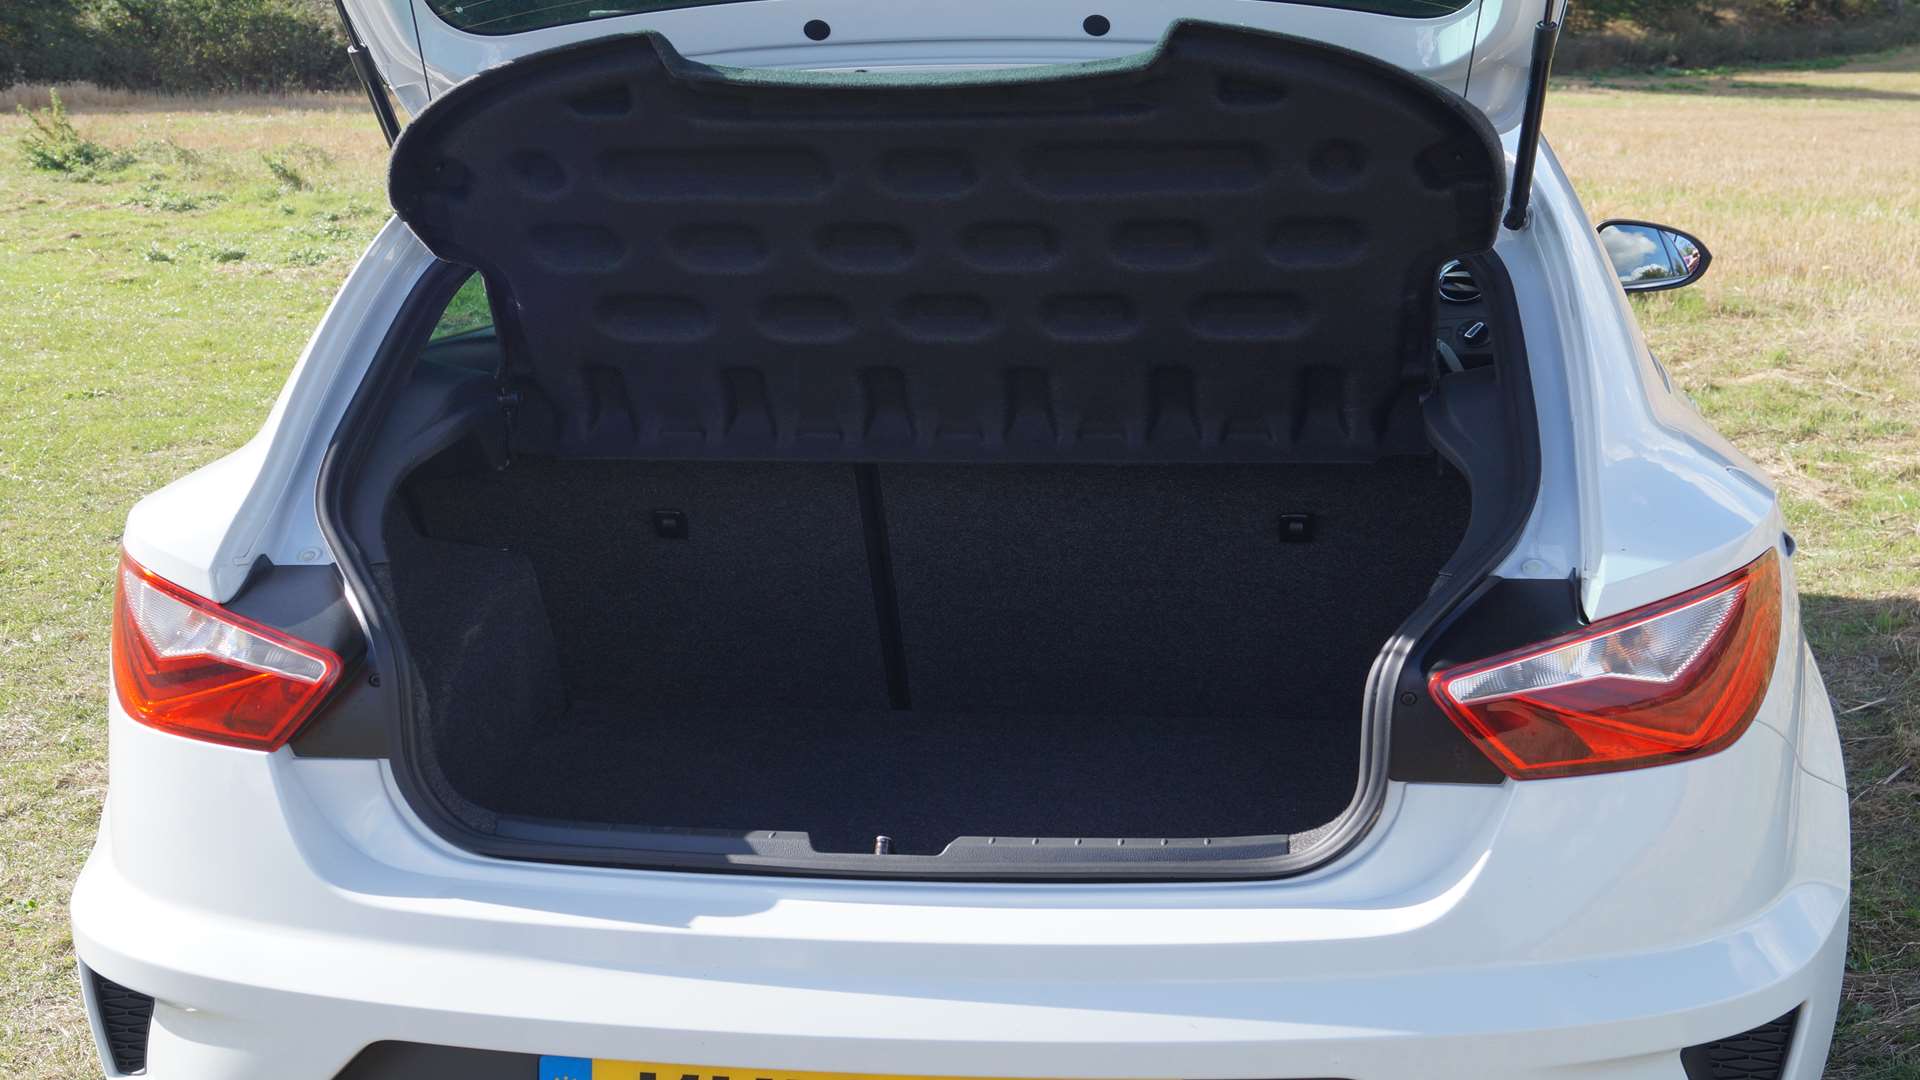 The 293-litre boot is more than adequate